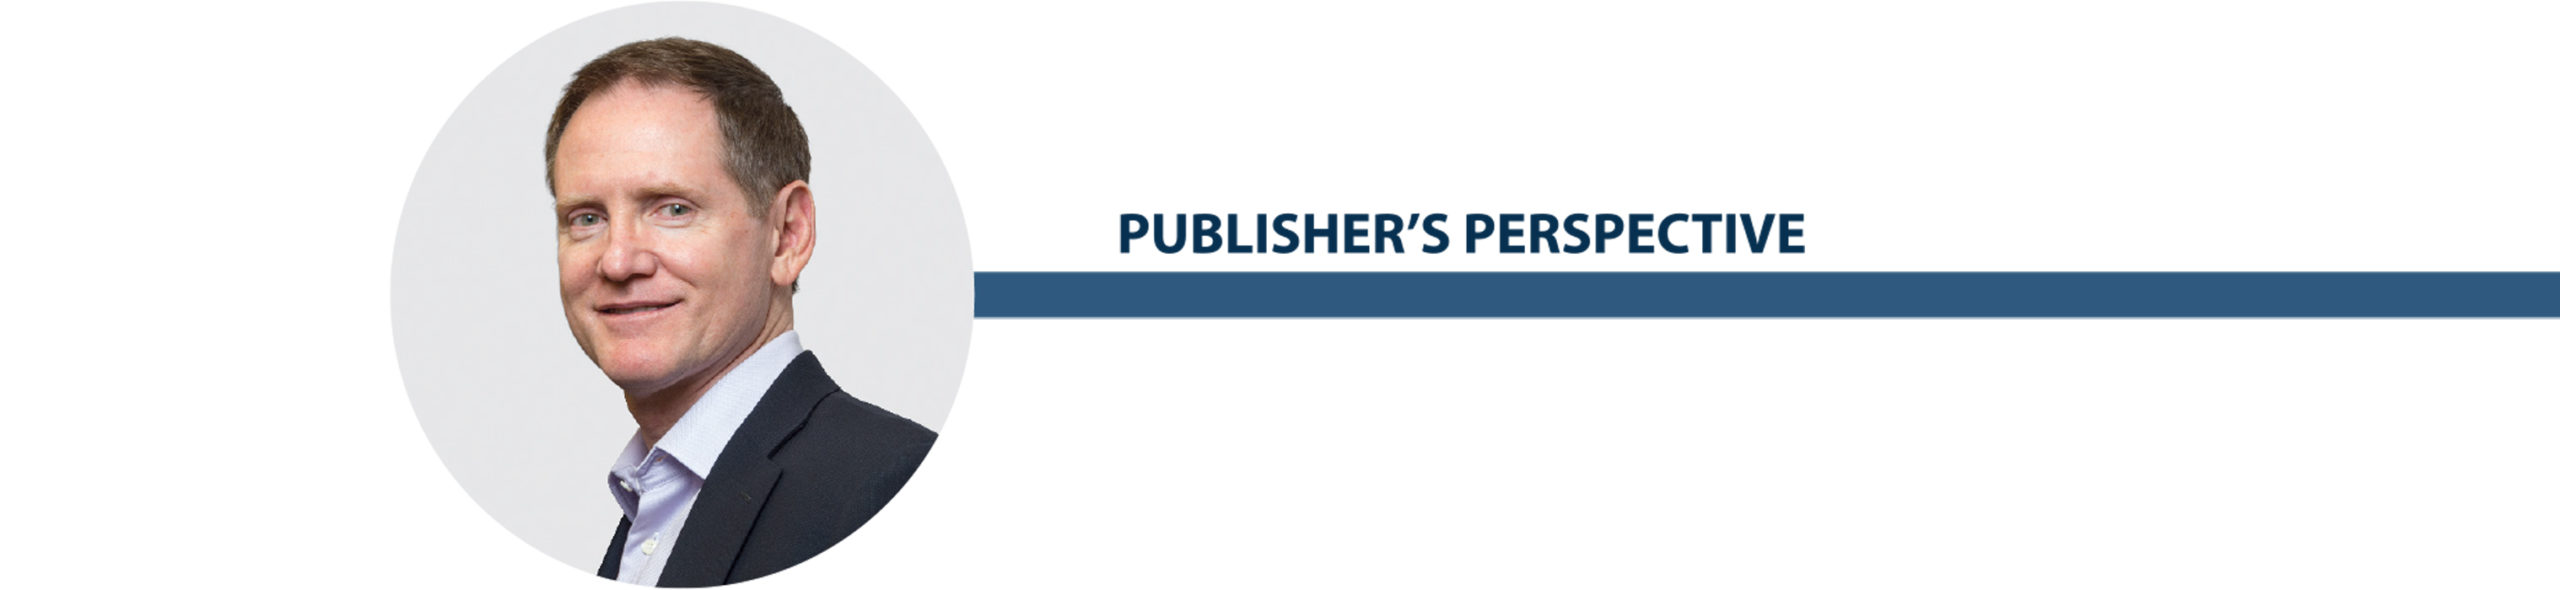 Publisher’s Perspective